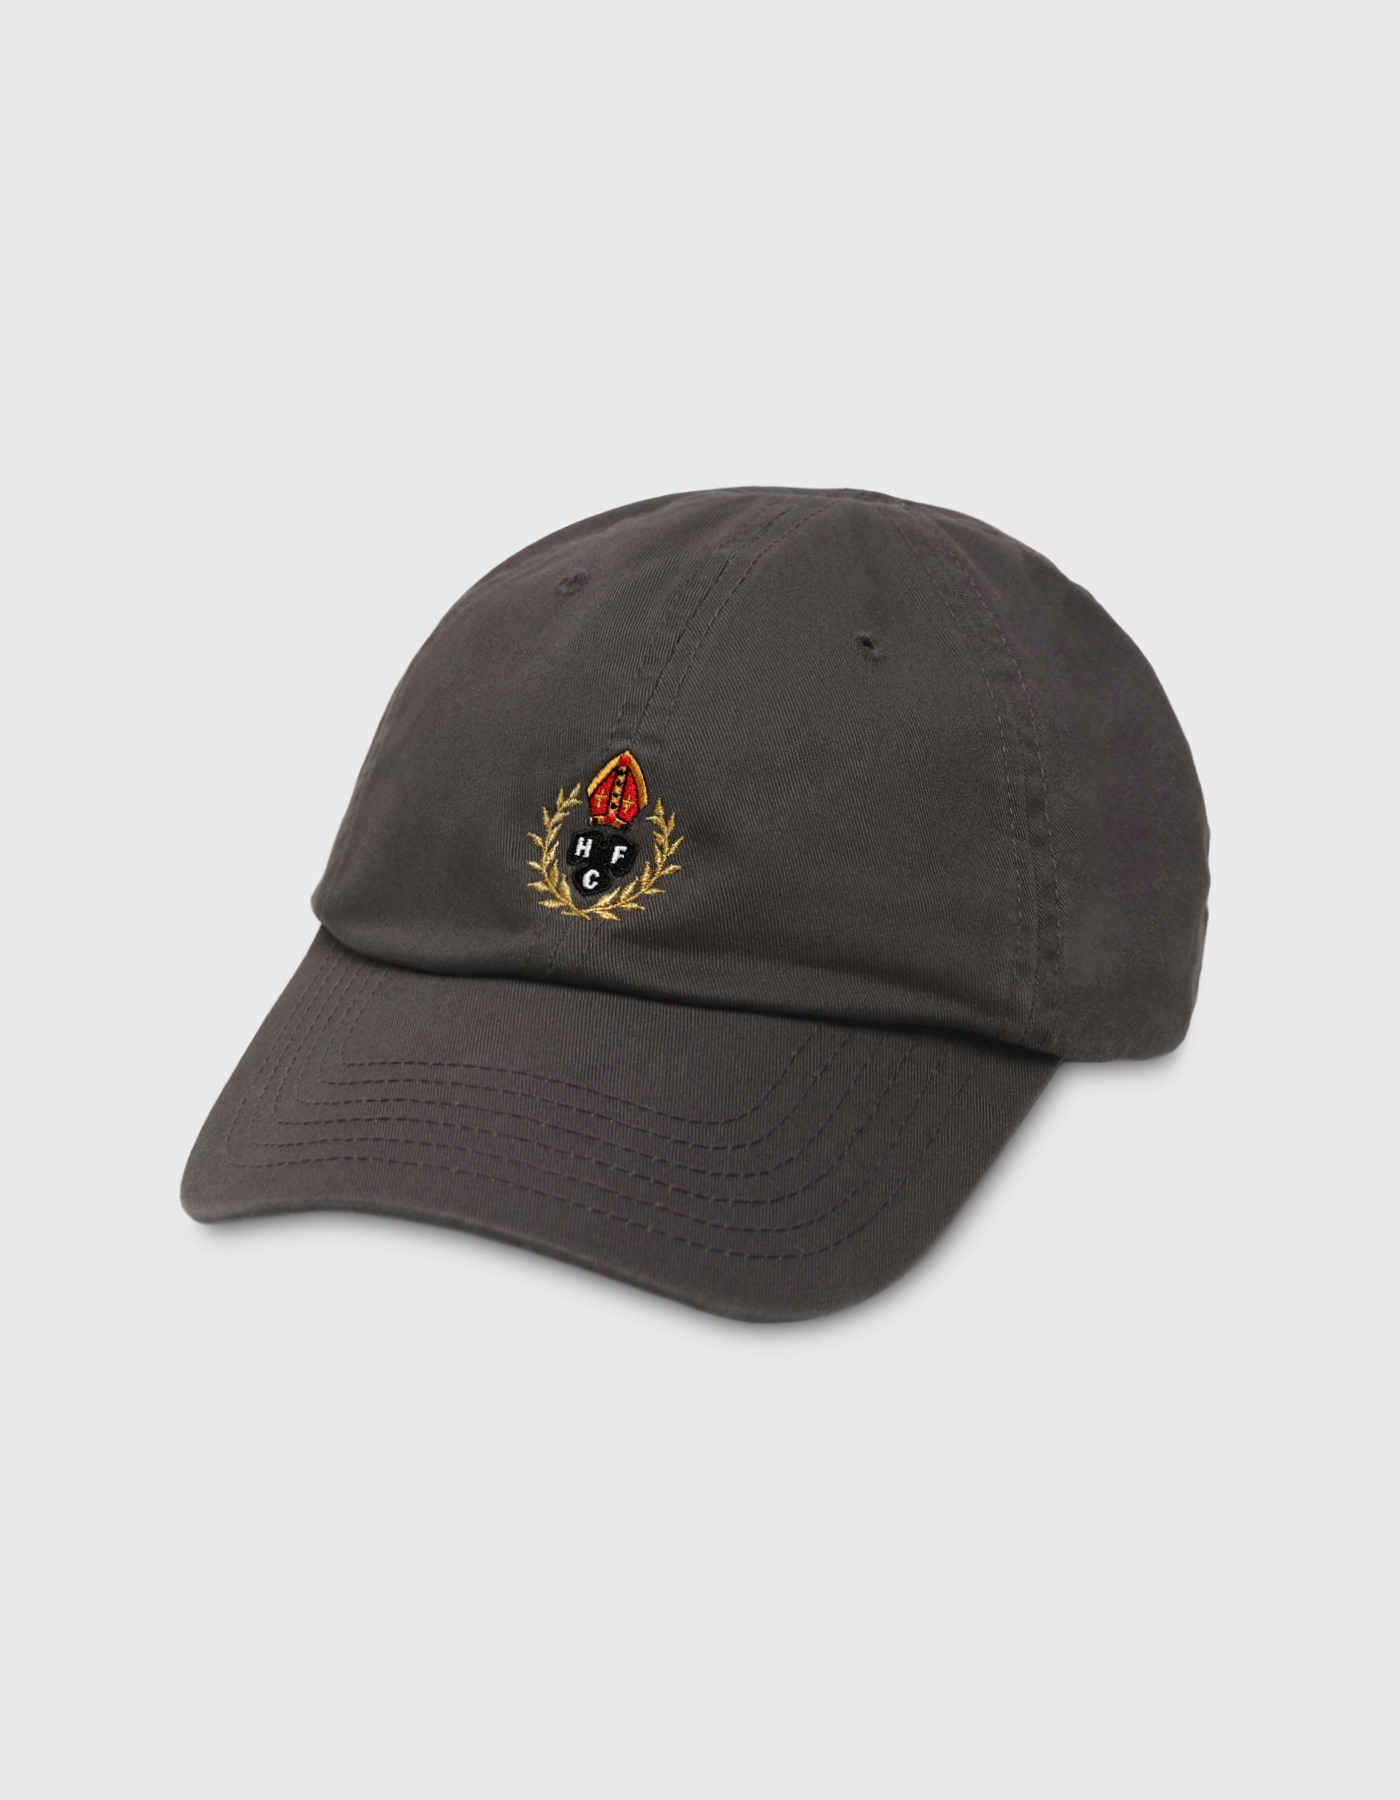 CREST TWILL WASHED CAP / Charcoal